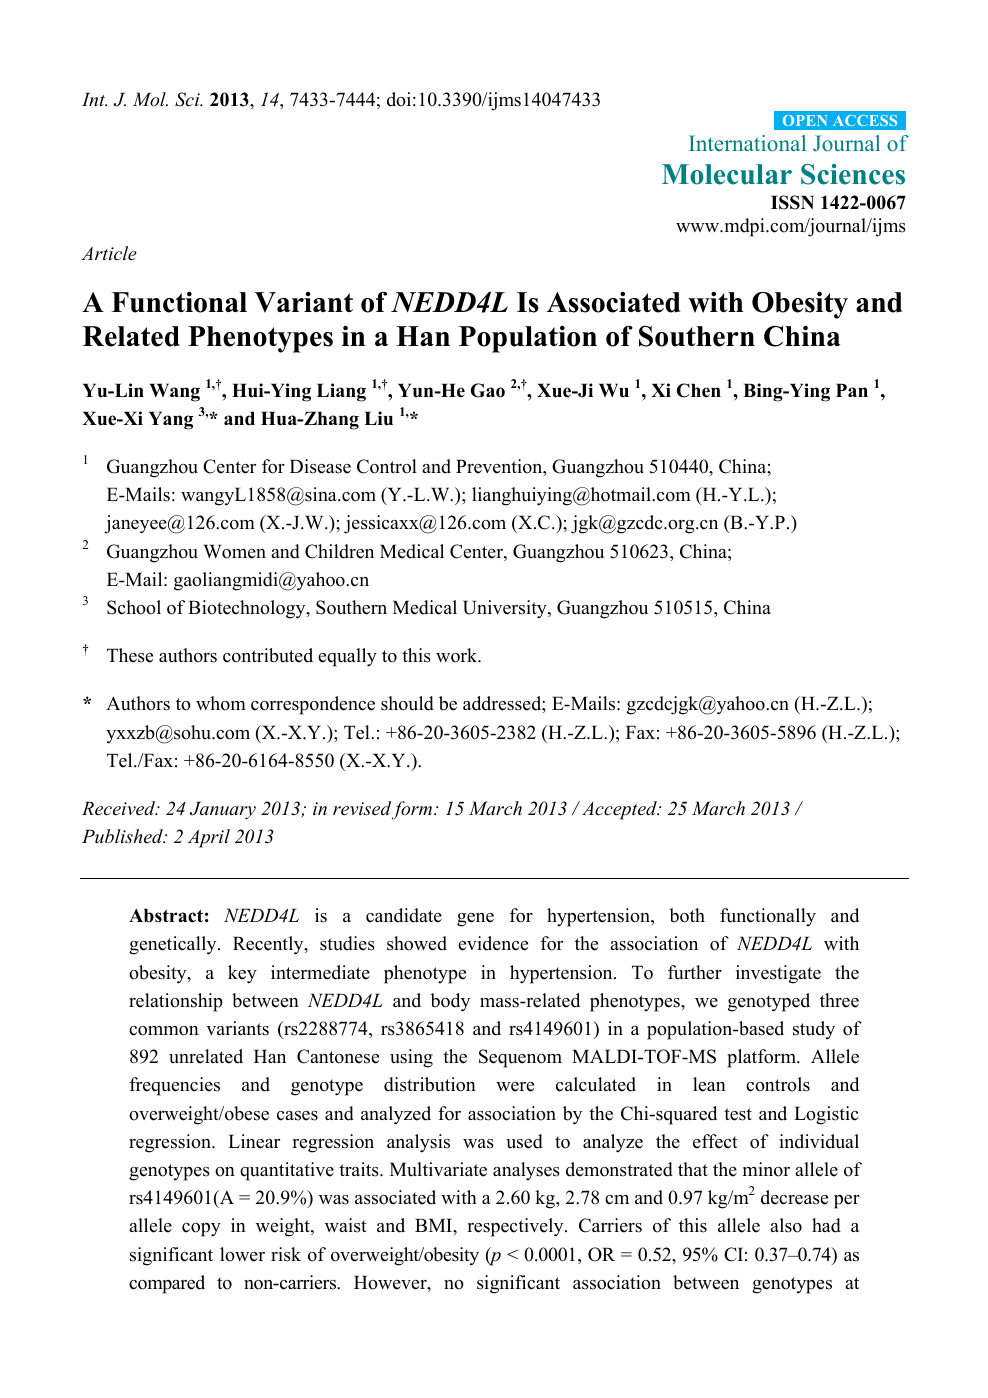 A Functional Variant Of Nedd4l Is Associated With Obesity And Related Phenotypes In A Han Population Of Southern China Topic Of Research Paper In Biological Sciences Download Scholarly Article Pdf And